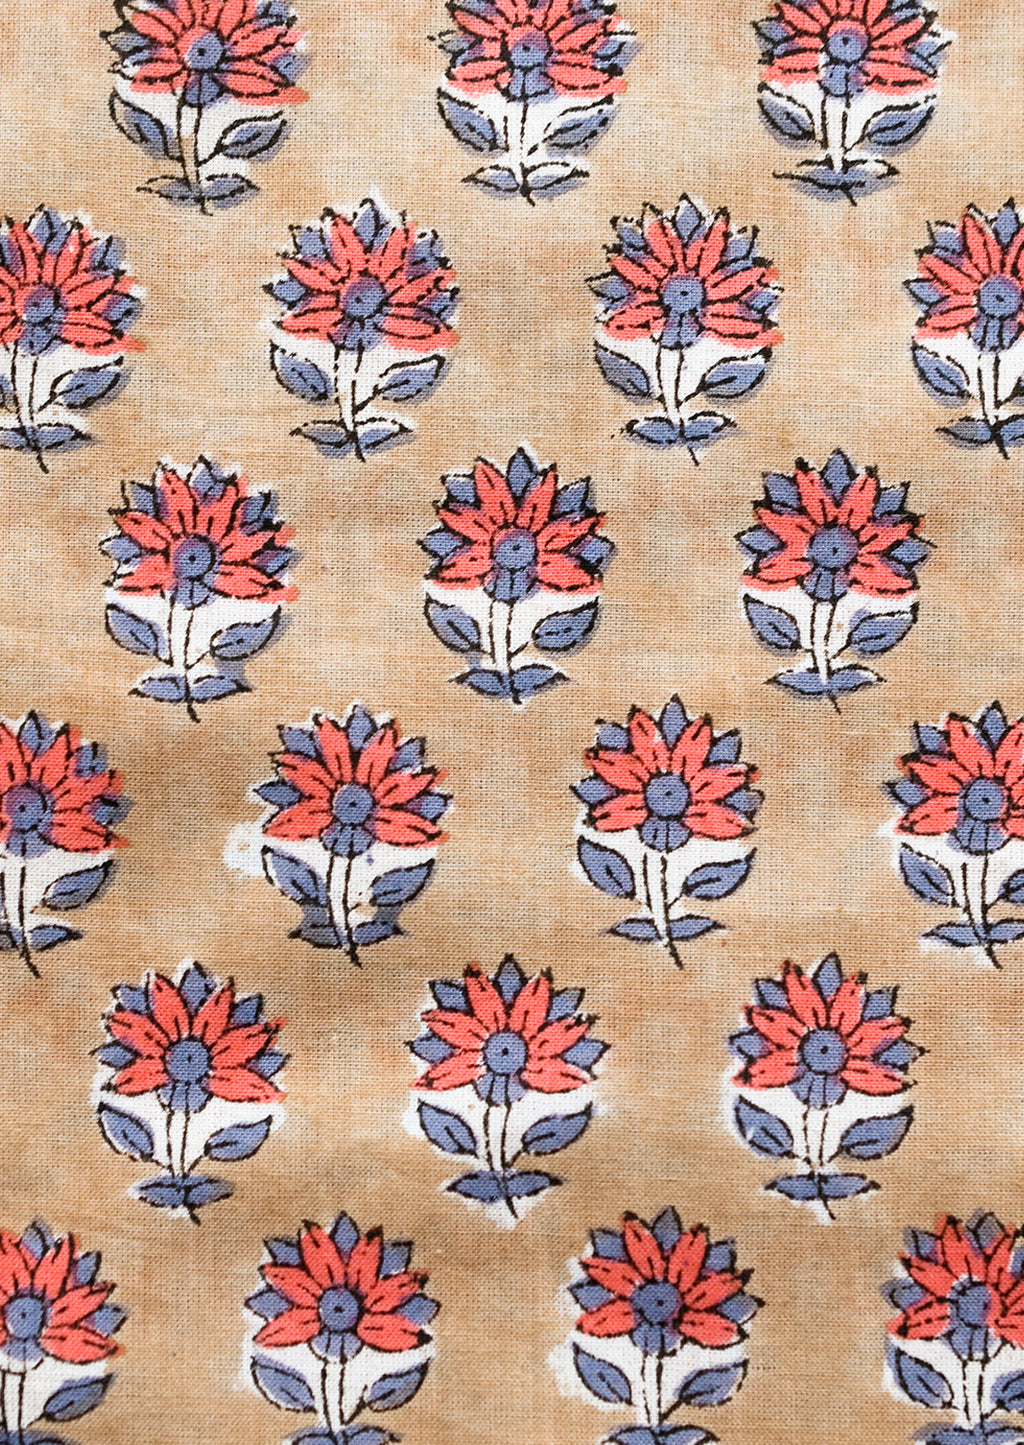 2: A block printed pillow in light brown with red and dusty blue flower print.